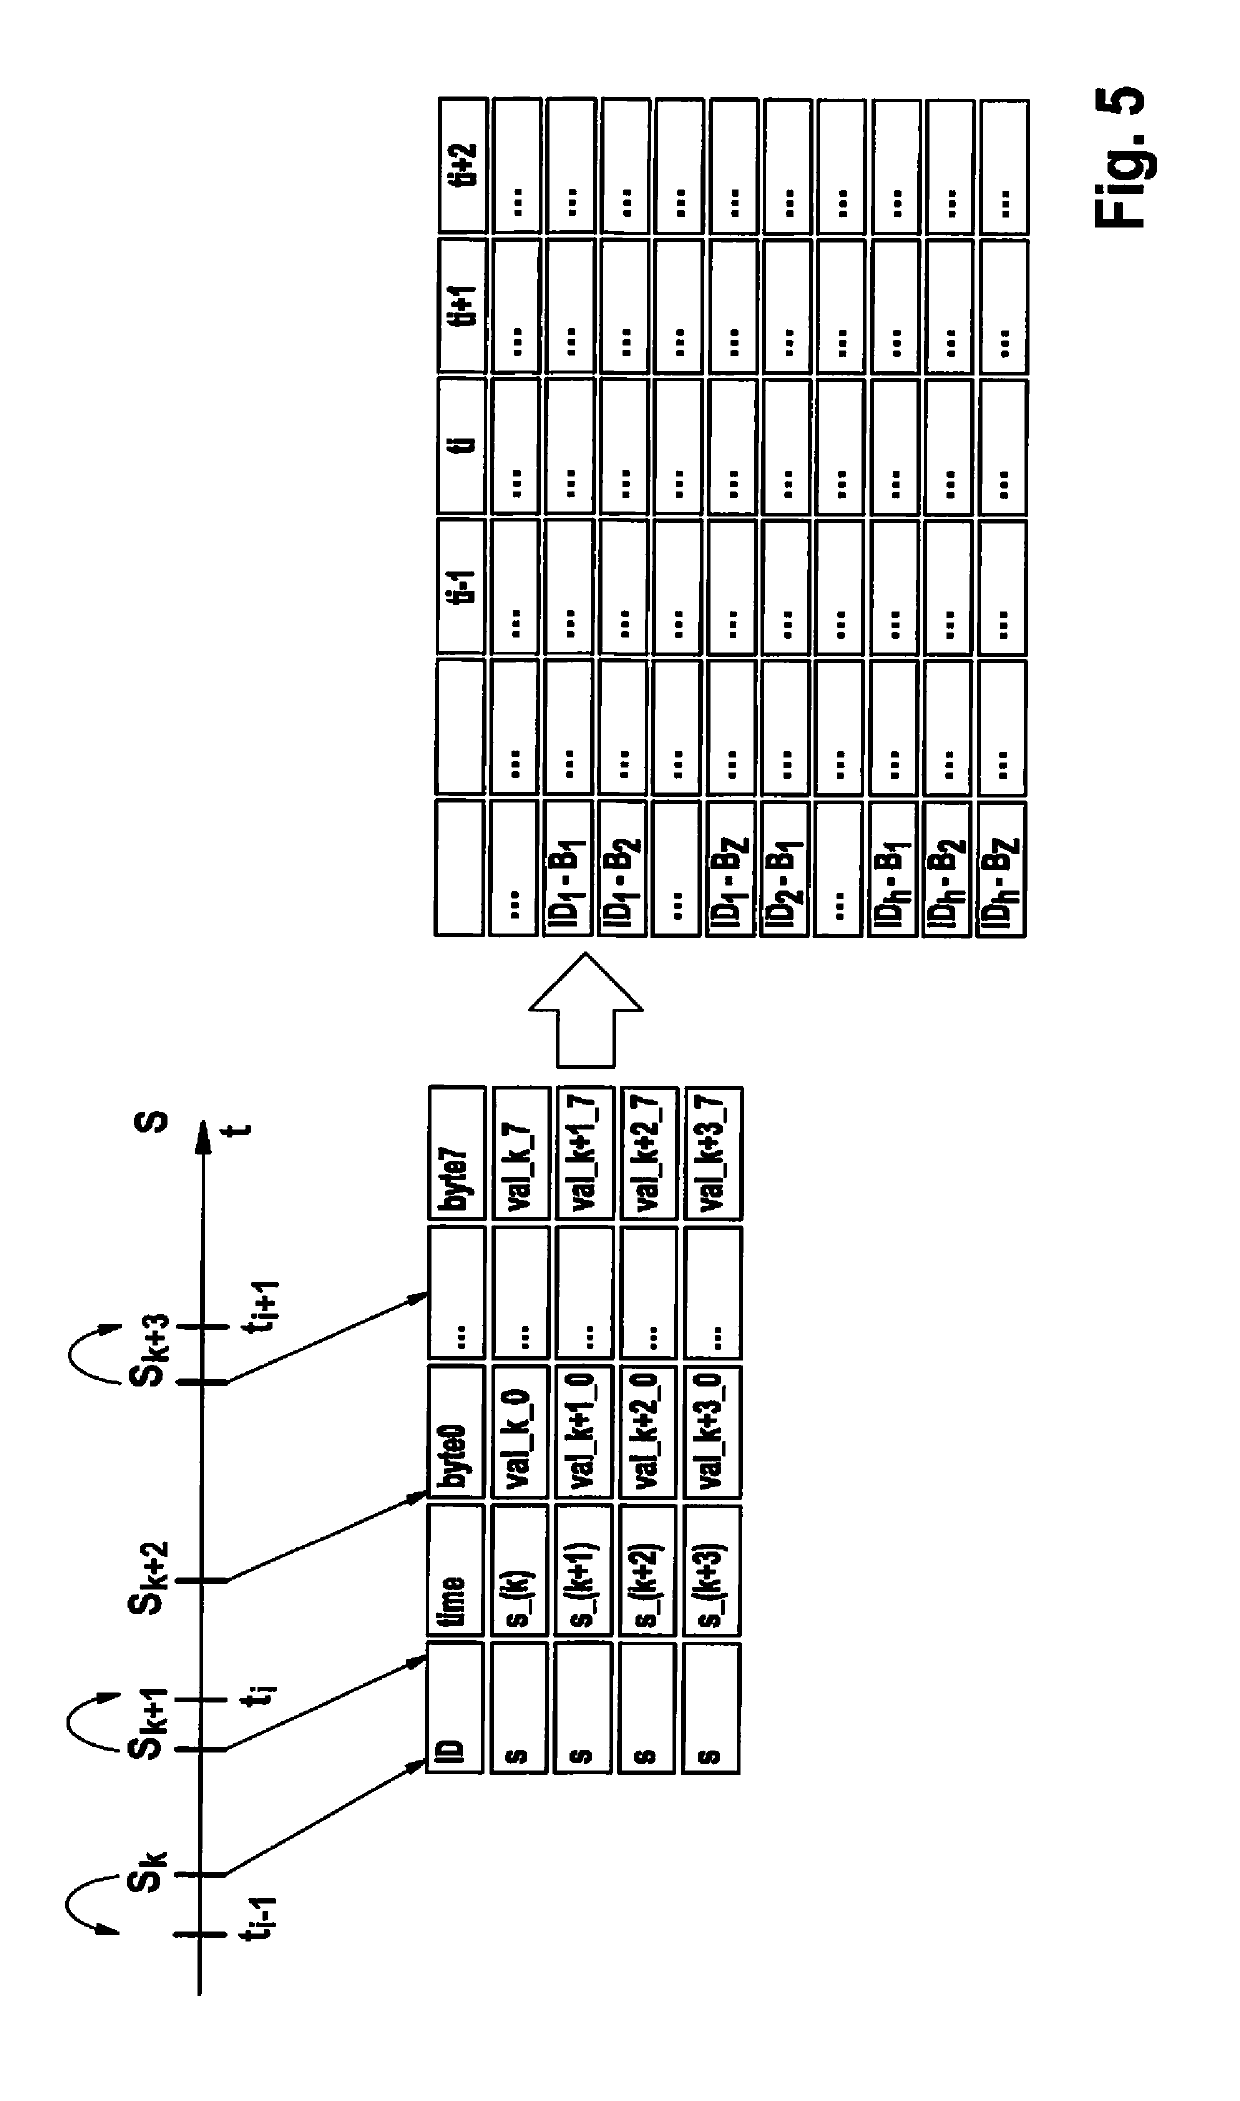 Method for the automated creation of rules for a rule-based anomaly recognition in a data stream